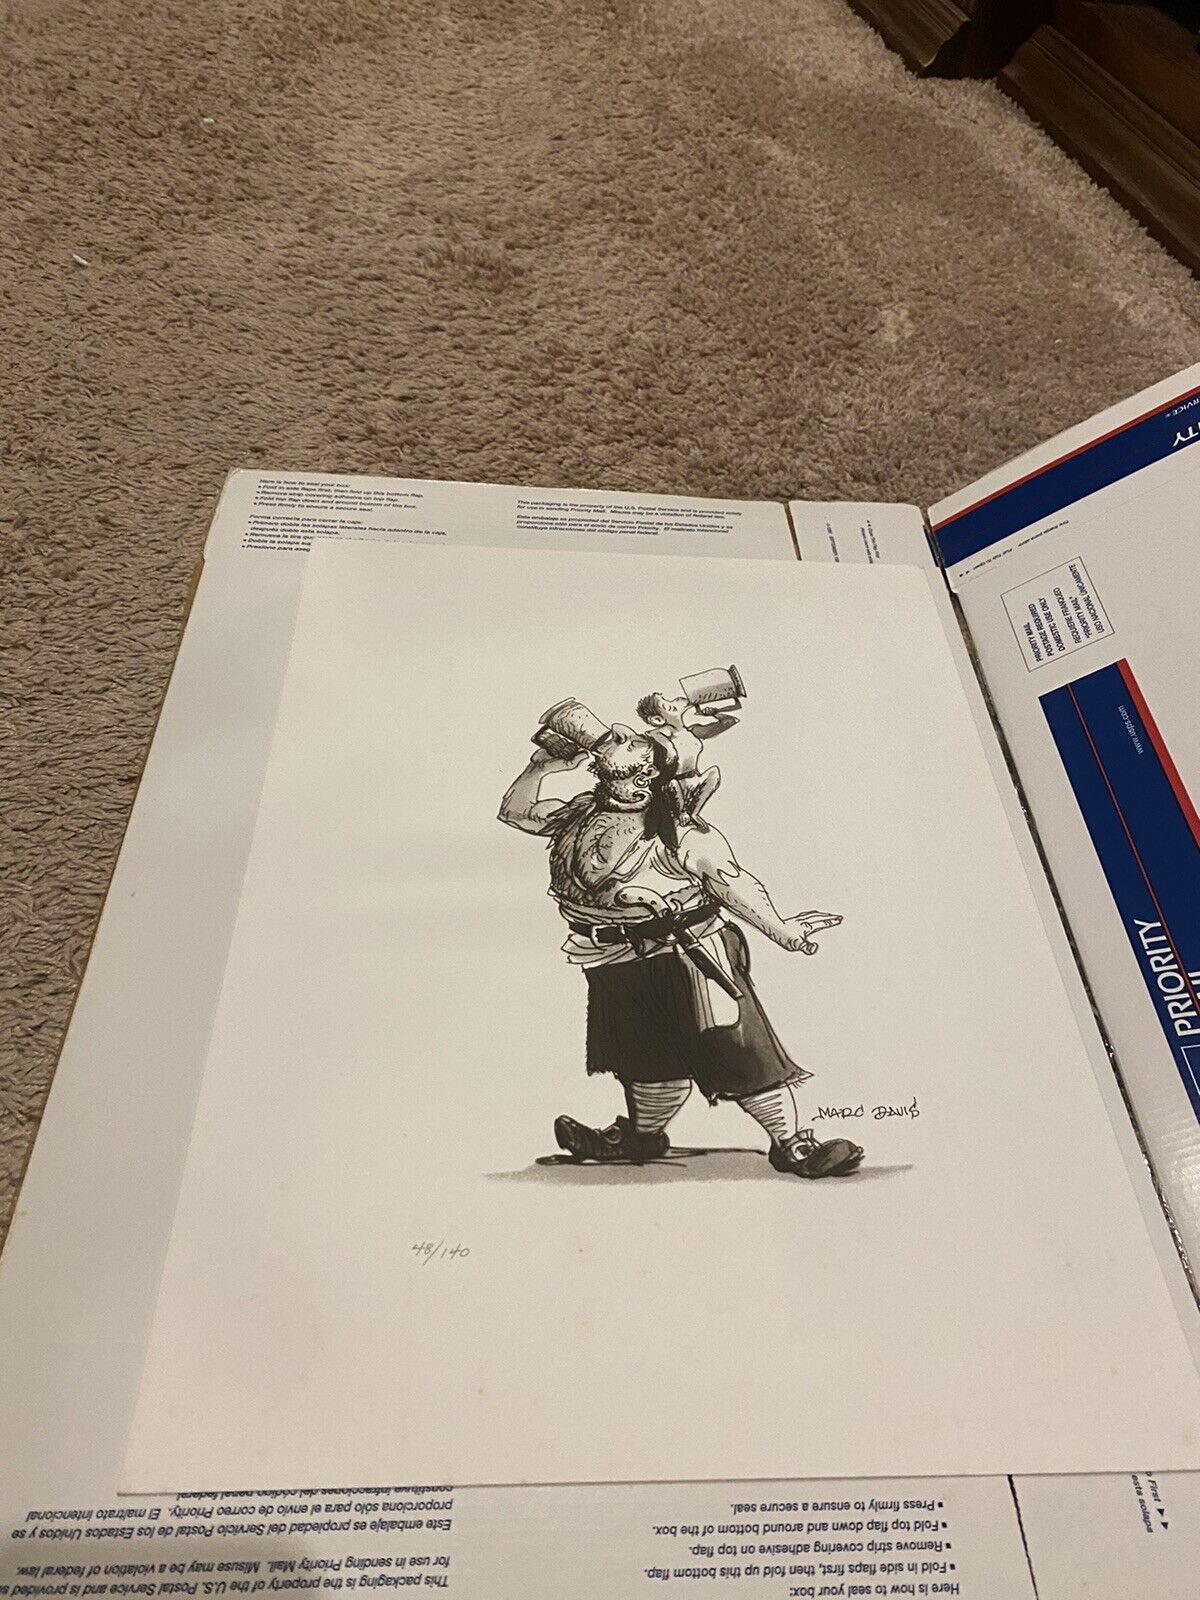 DISNEY MARC DAVIS LITHOGRAPH - PIRATES OF THE CARRIBBEAN - DRINKING PIRATE NLE